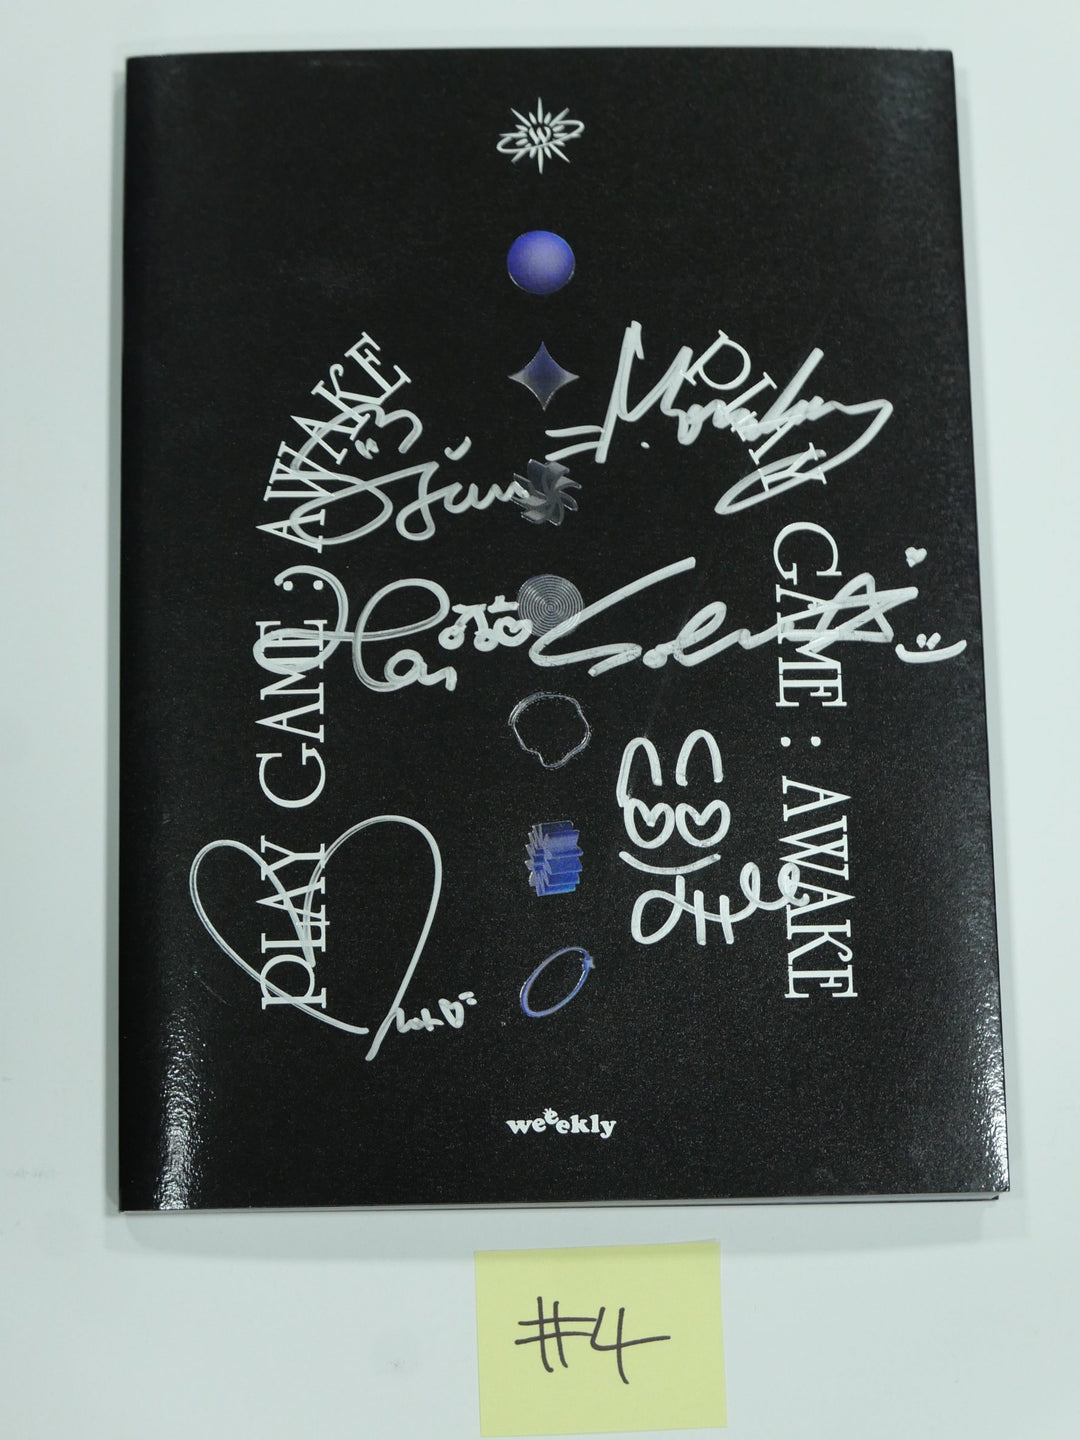 Weeekly "Play Game : AWAKE" - Hand Autographed(Signed) Promo Album